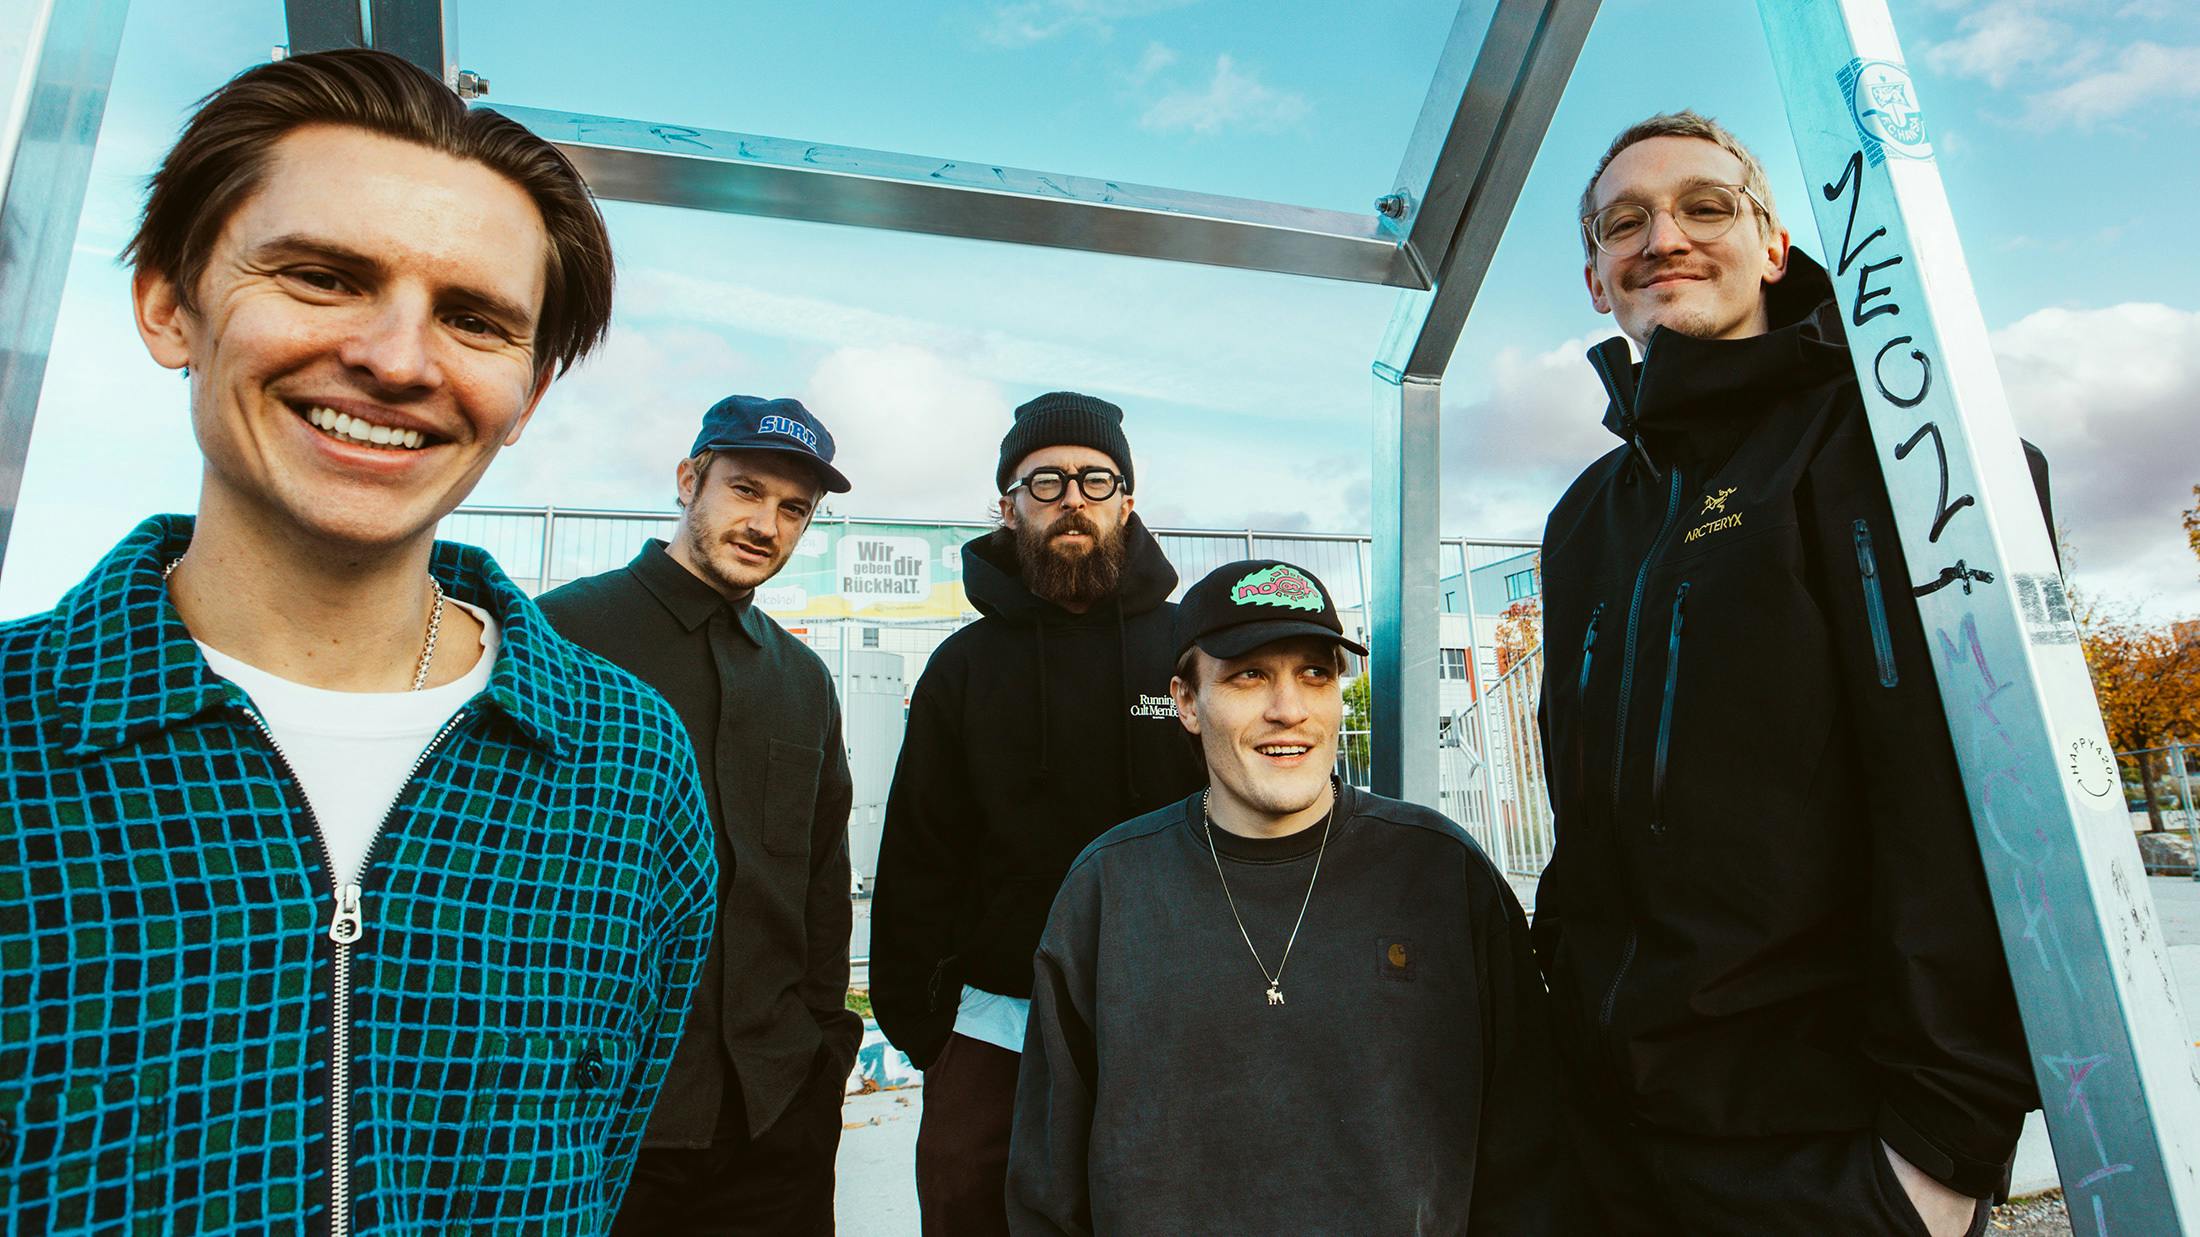 Neck Deep: “We’ve hit a point where we don’t have anything to prove, and we’ve still got room to grow – so we just keep doing it”